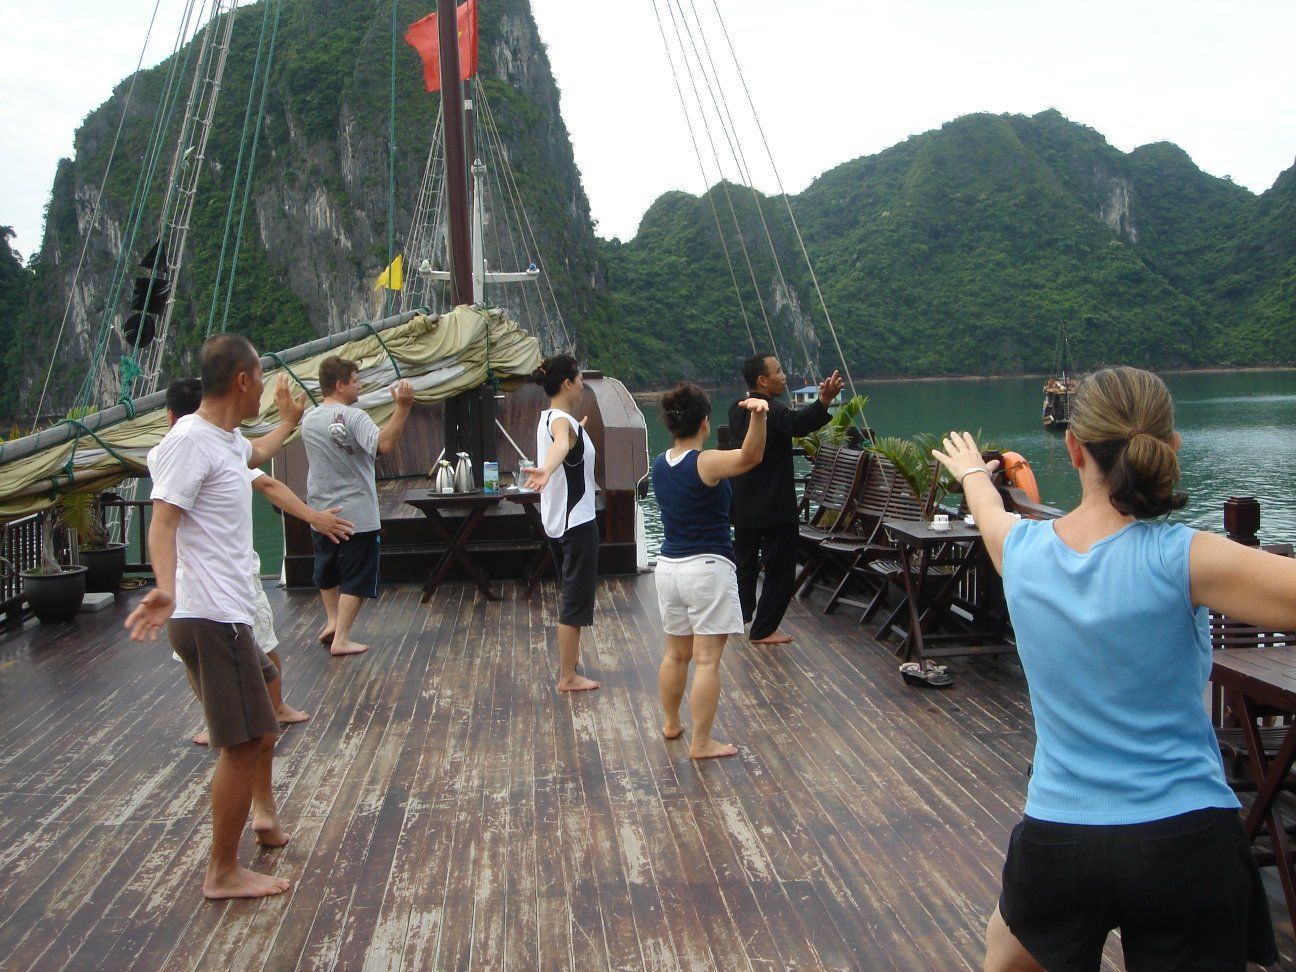 Lyn practicing yoga on a ship in Halong Bay, Vietnam